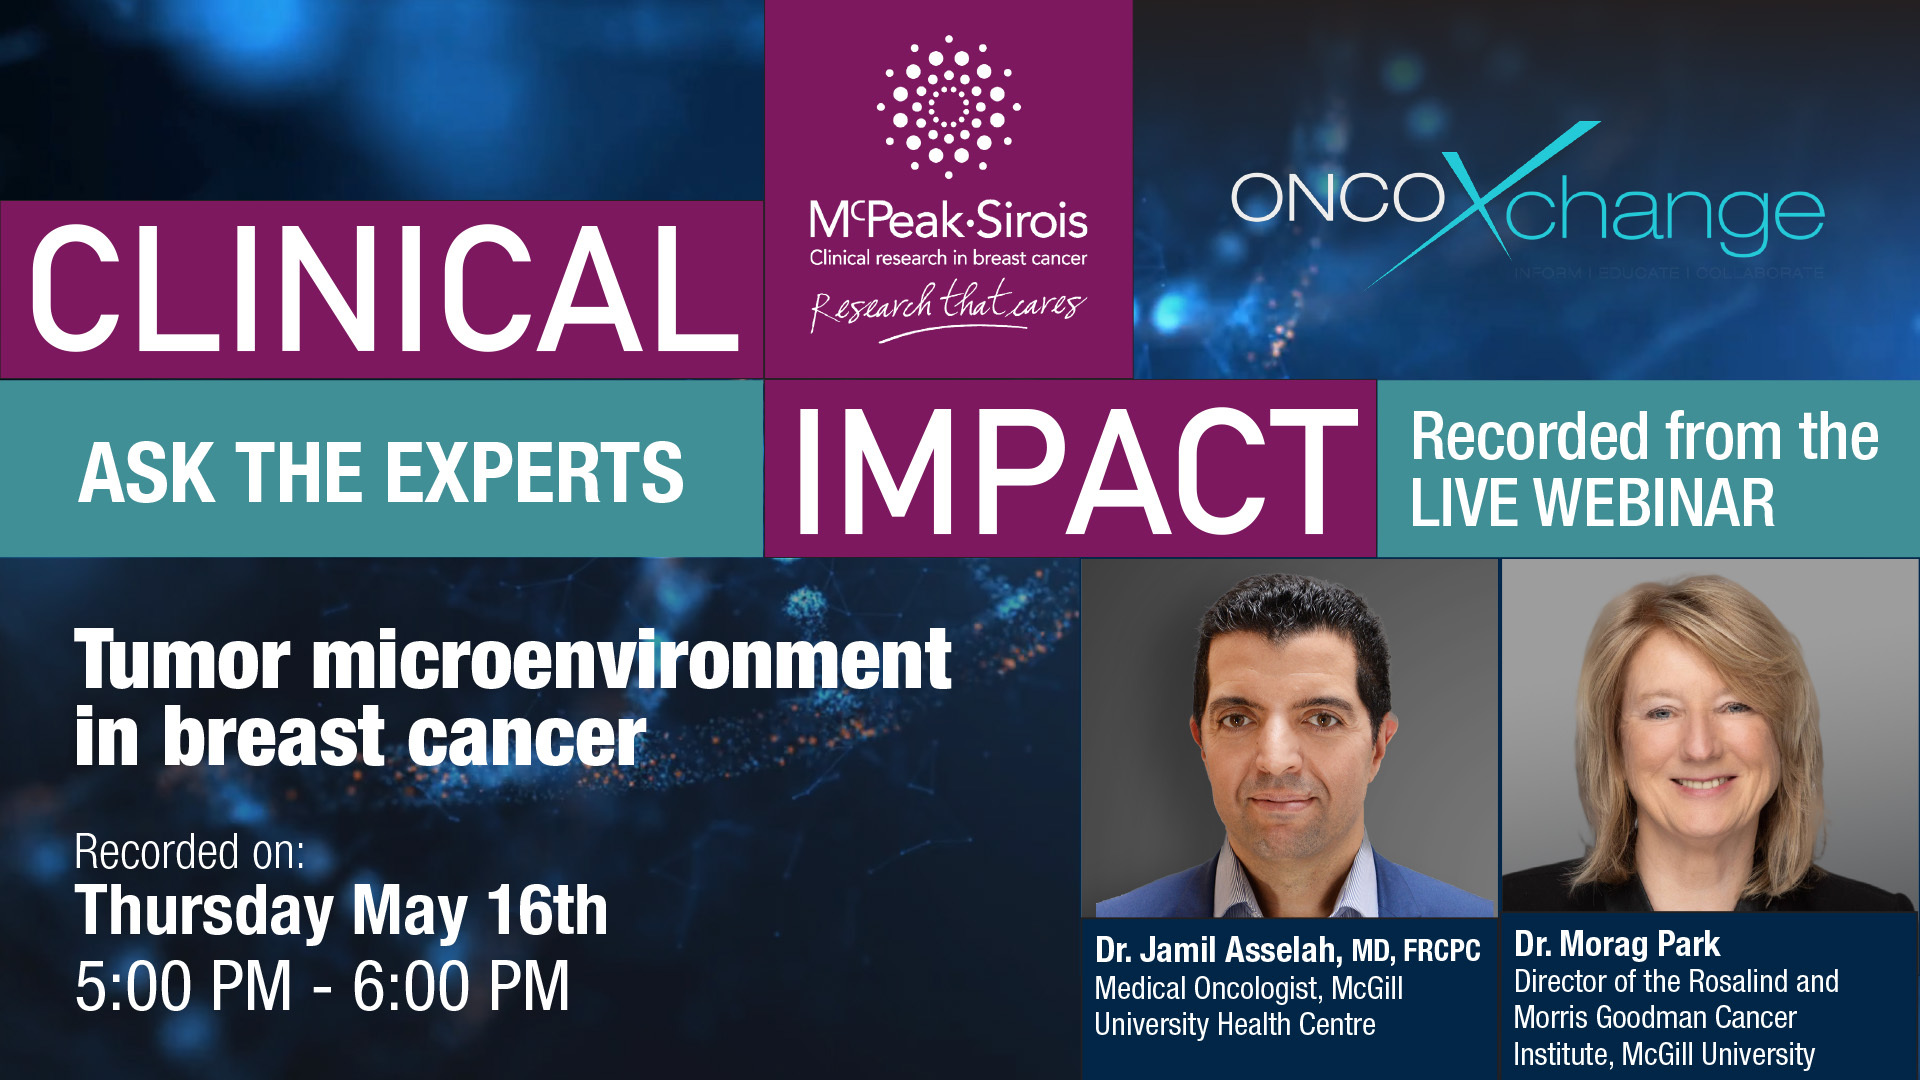 CLINICAL IMPACT - Ask the experts: Tumor microenvironment in breast cancer